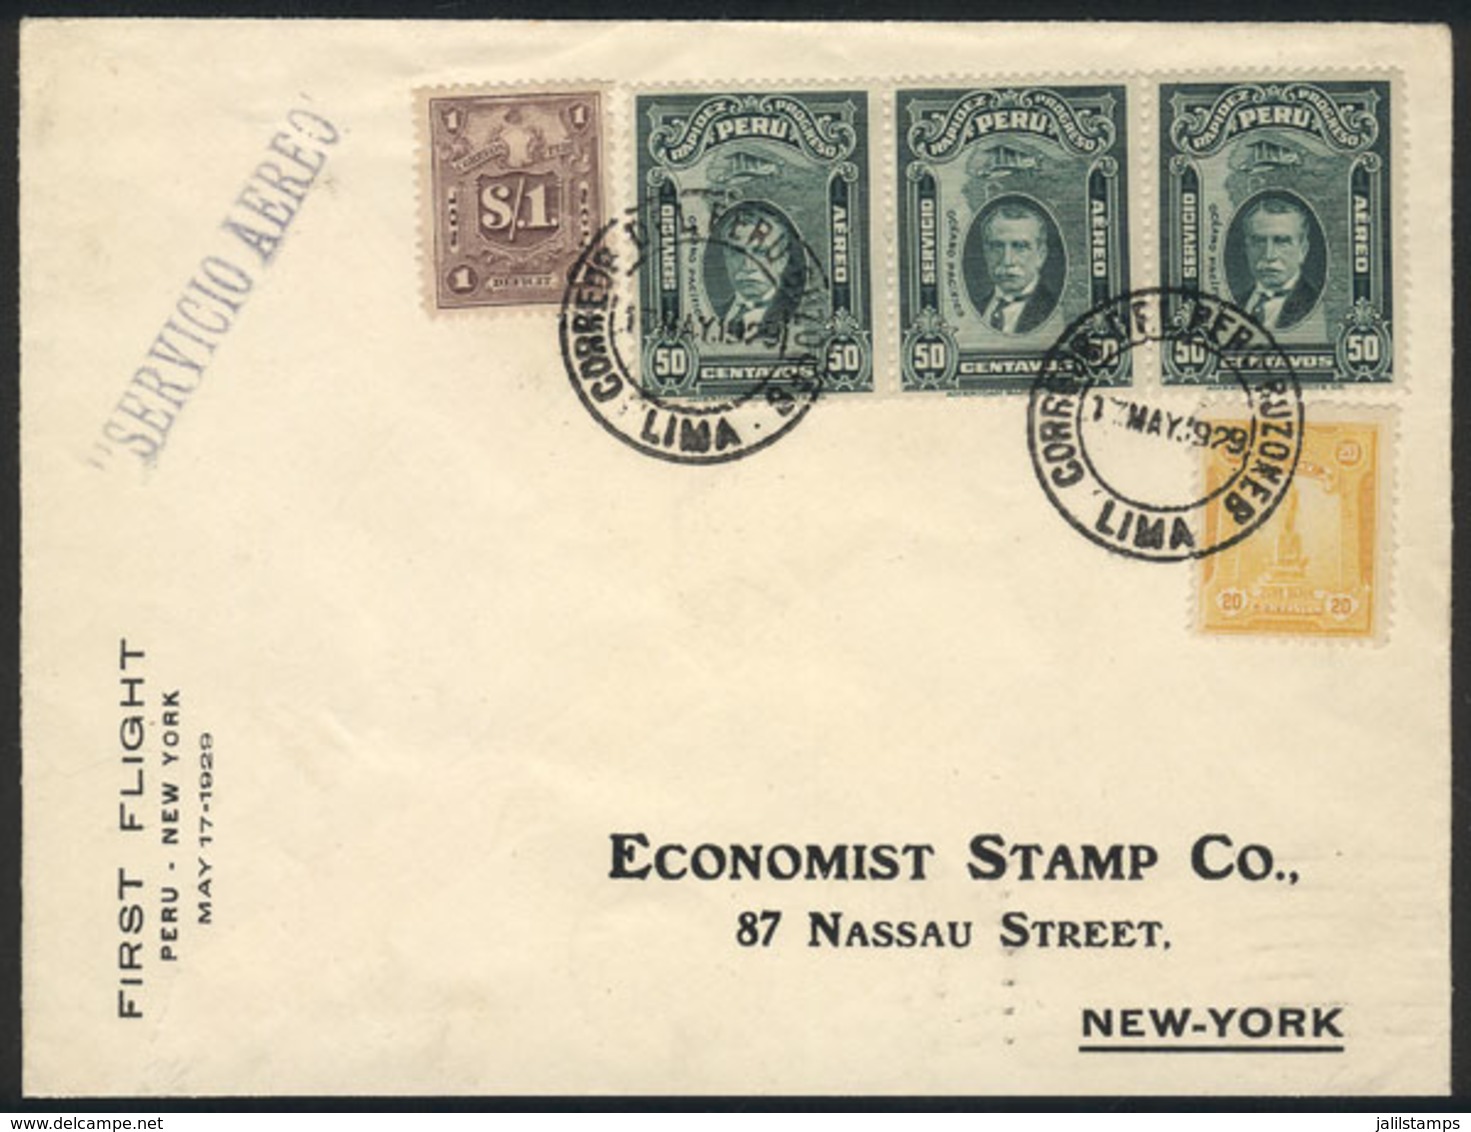 PERU: 17/MAY/1929 Lima - New York, Cover Carried On The FIRST FLIGHT Lima - Cristobal Of 18/MAY, Arrival Backstamp Of 20 - Peru